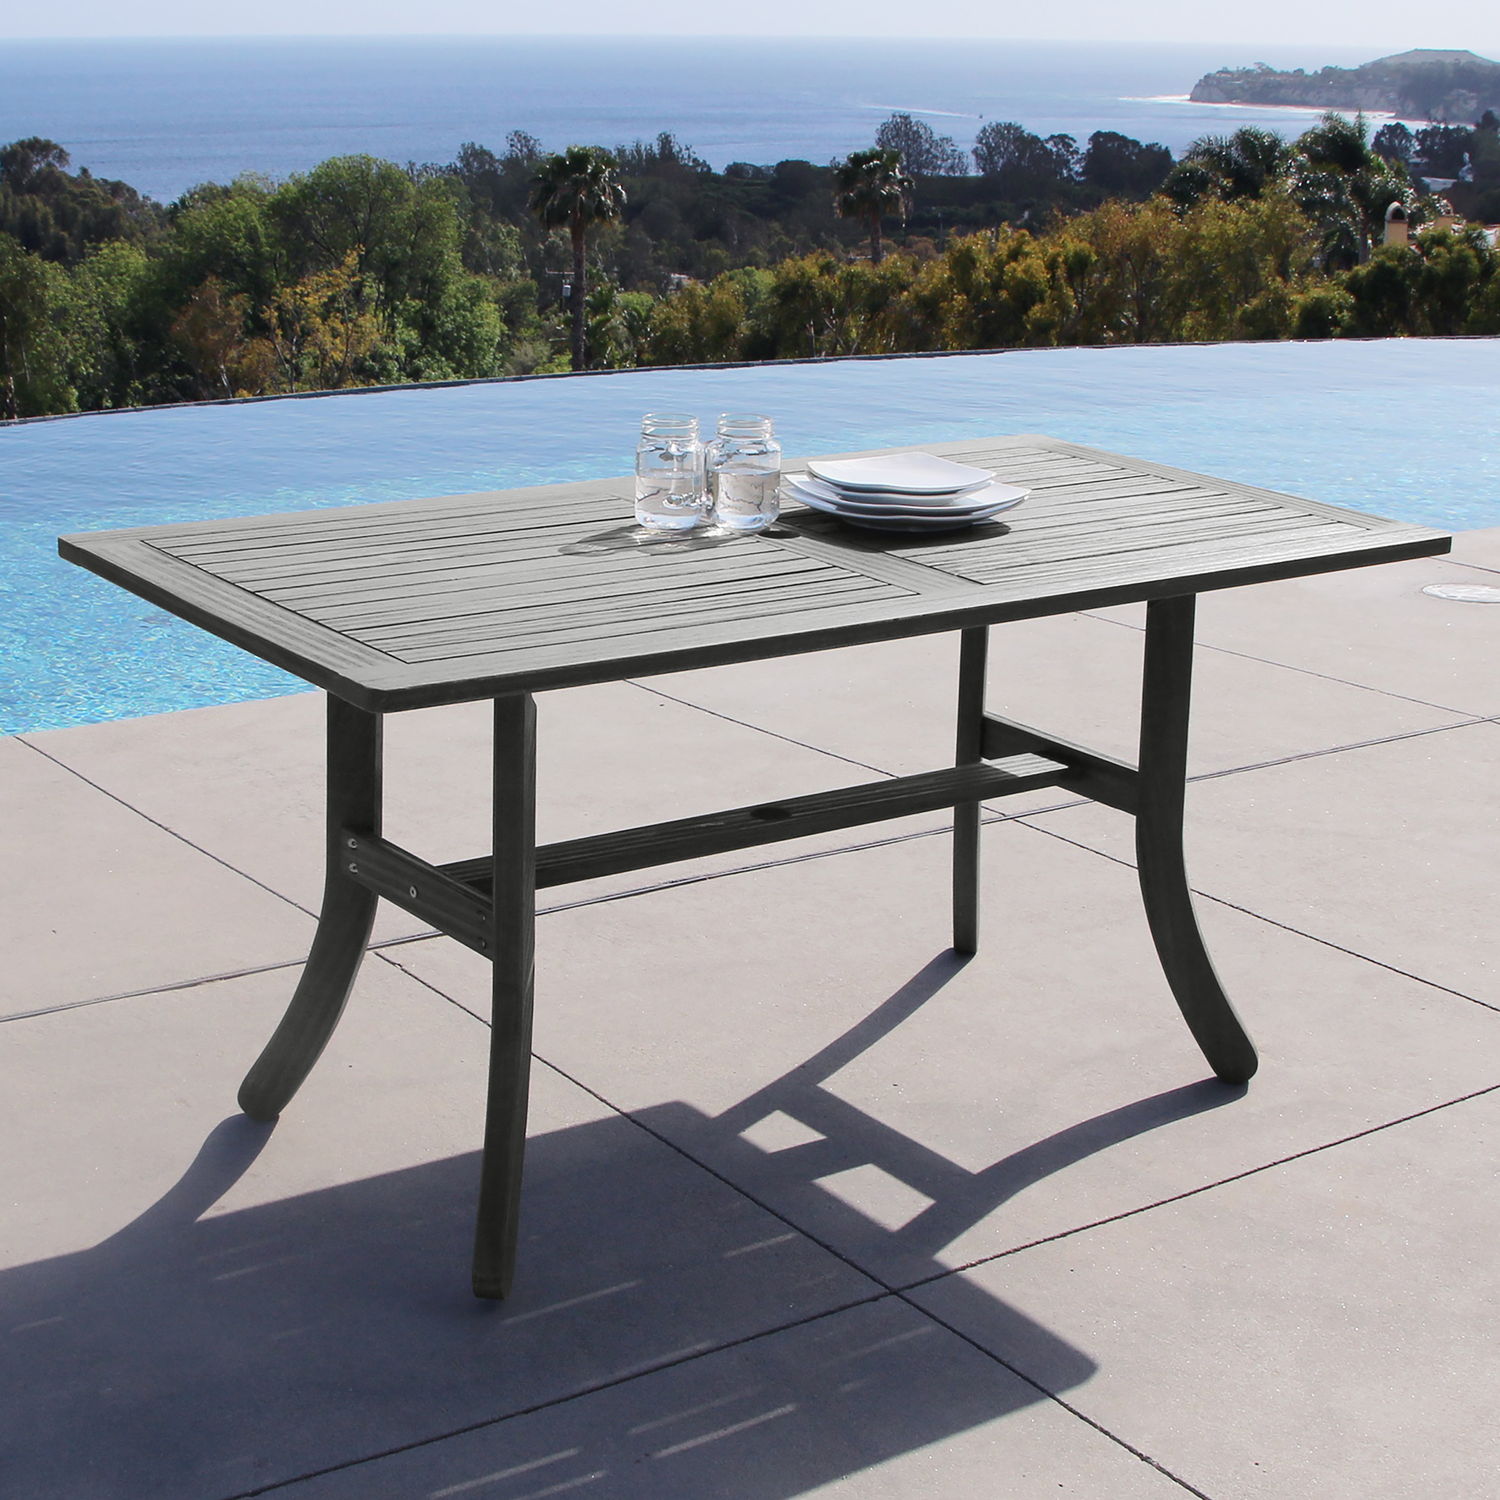 Renaissance Outdoor Patio Hand-scraped Wood Rectangular Dining Table with Curvy Legs